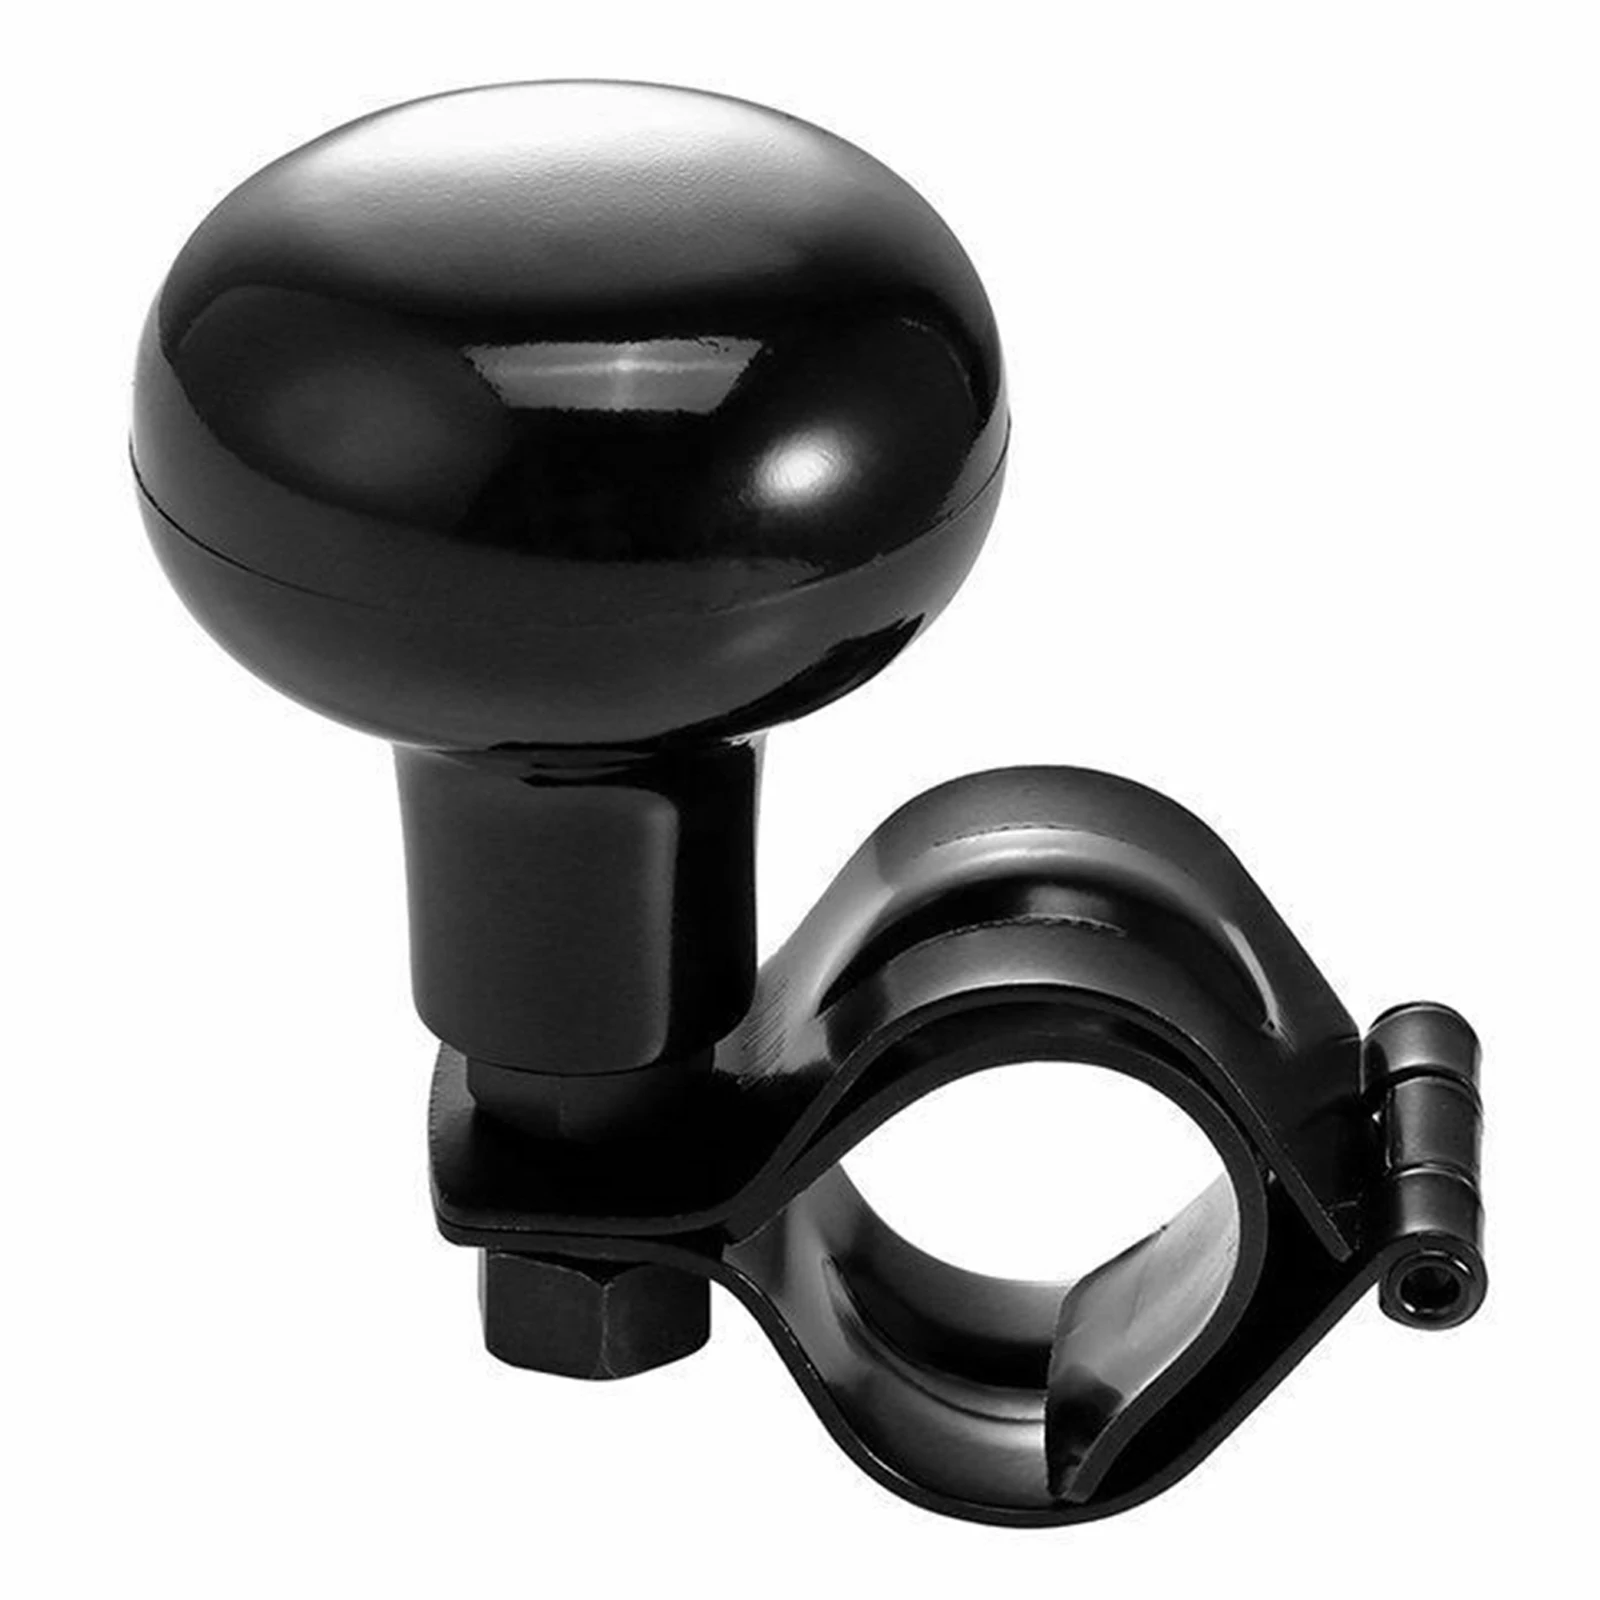 Universal Car Heavy Duty Truck Steering Wheel Power Spinner Knob Handle Booster Ball Hand Control Turning Helper Styling Cover